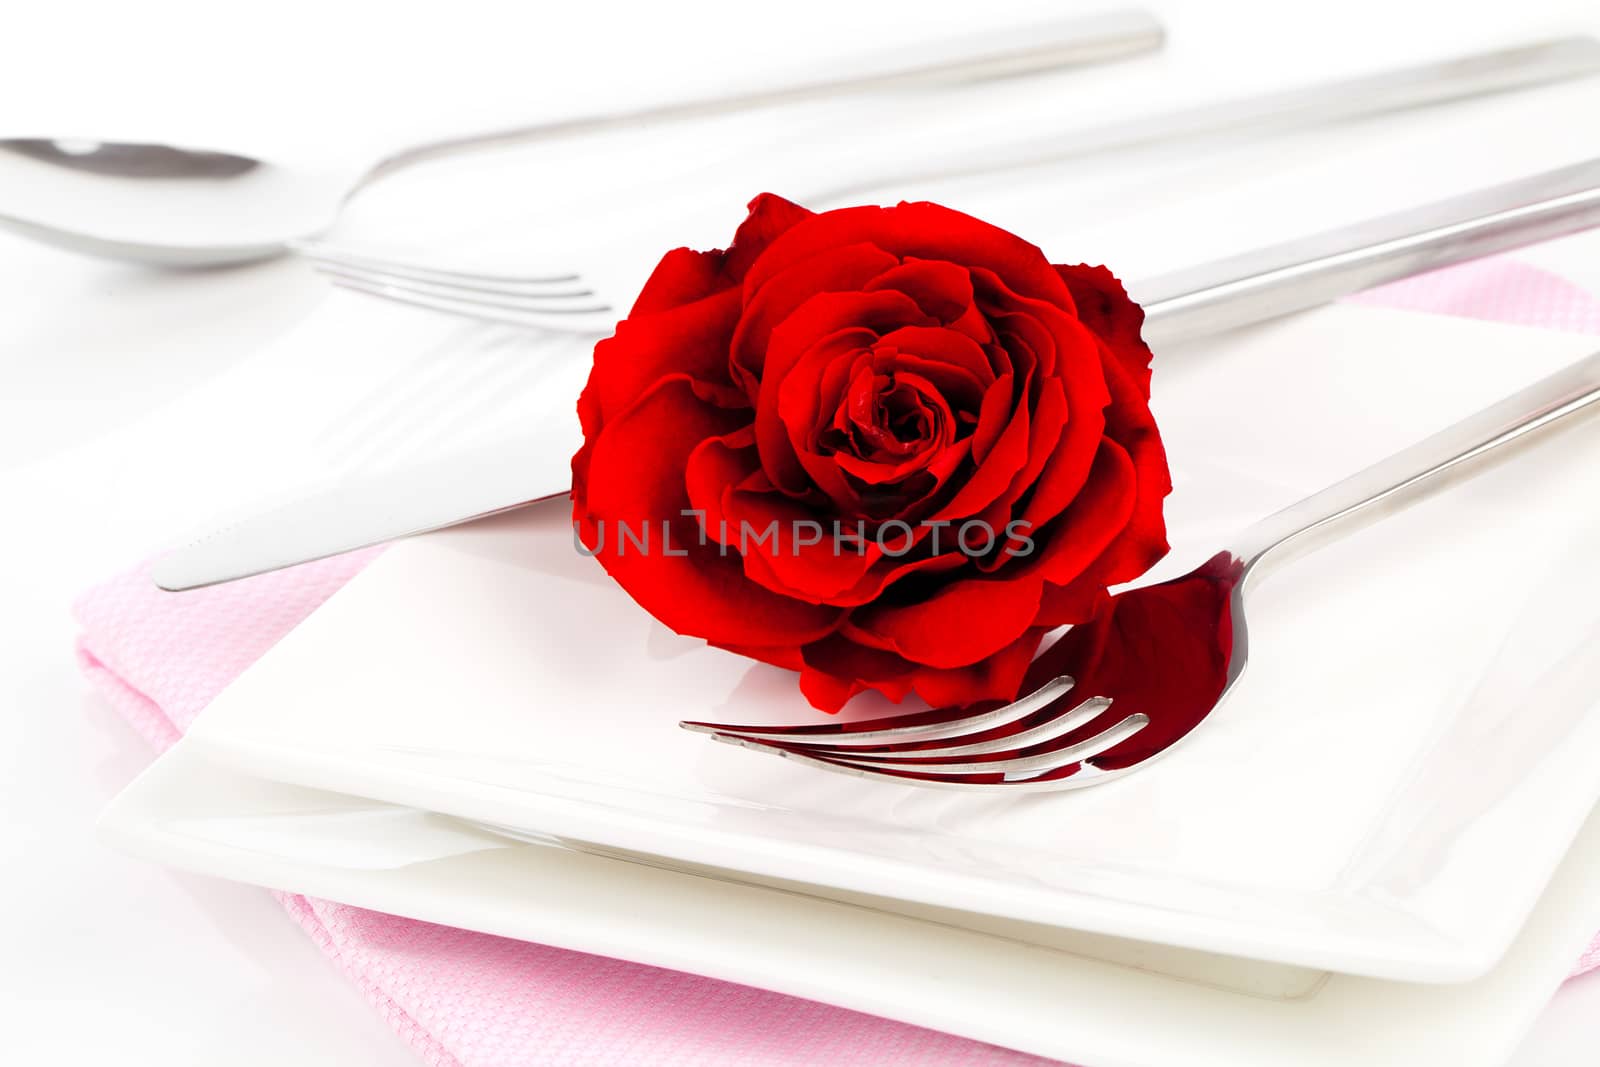 Valentines table setting with an gift box, to celebrate the holiday with a loved one